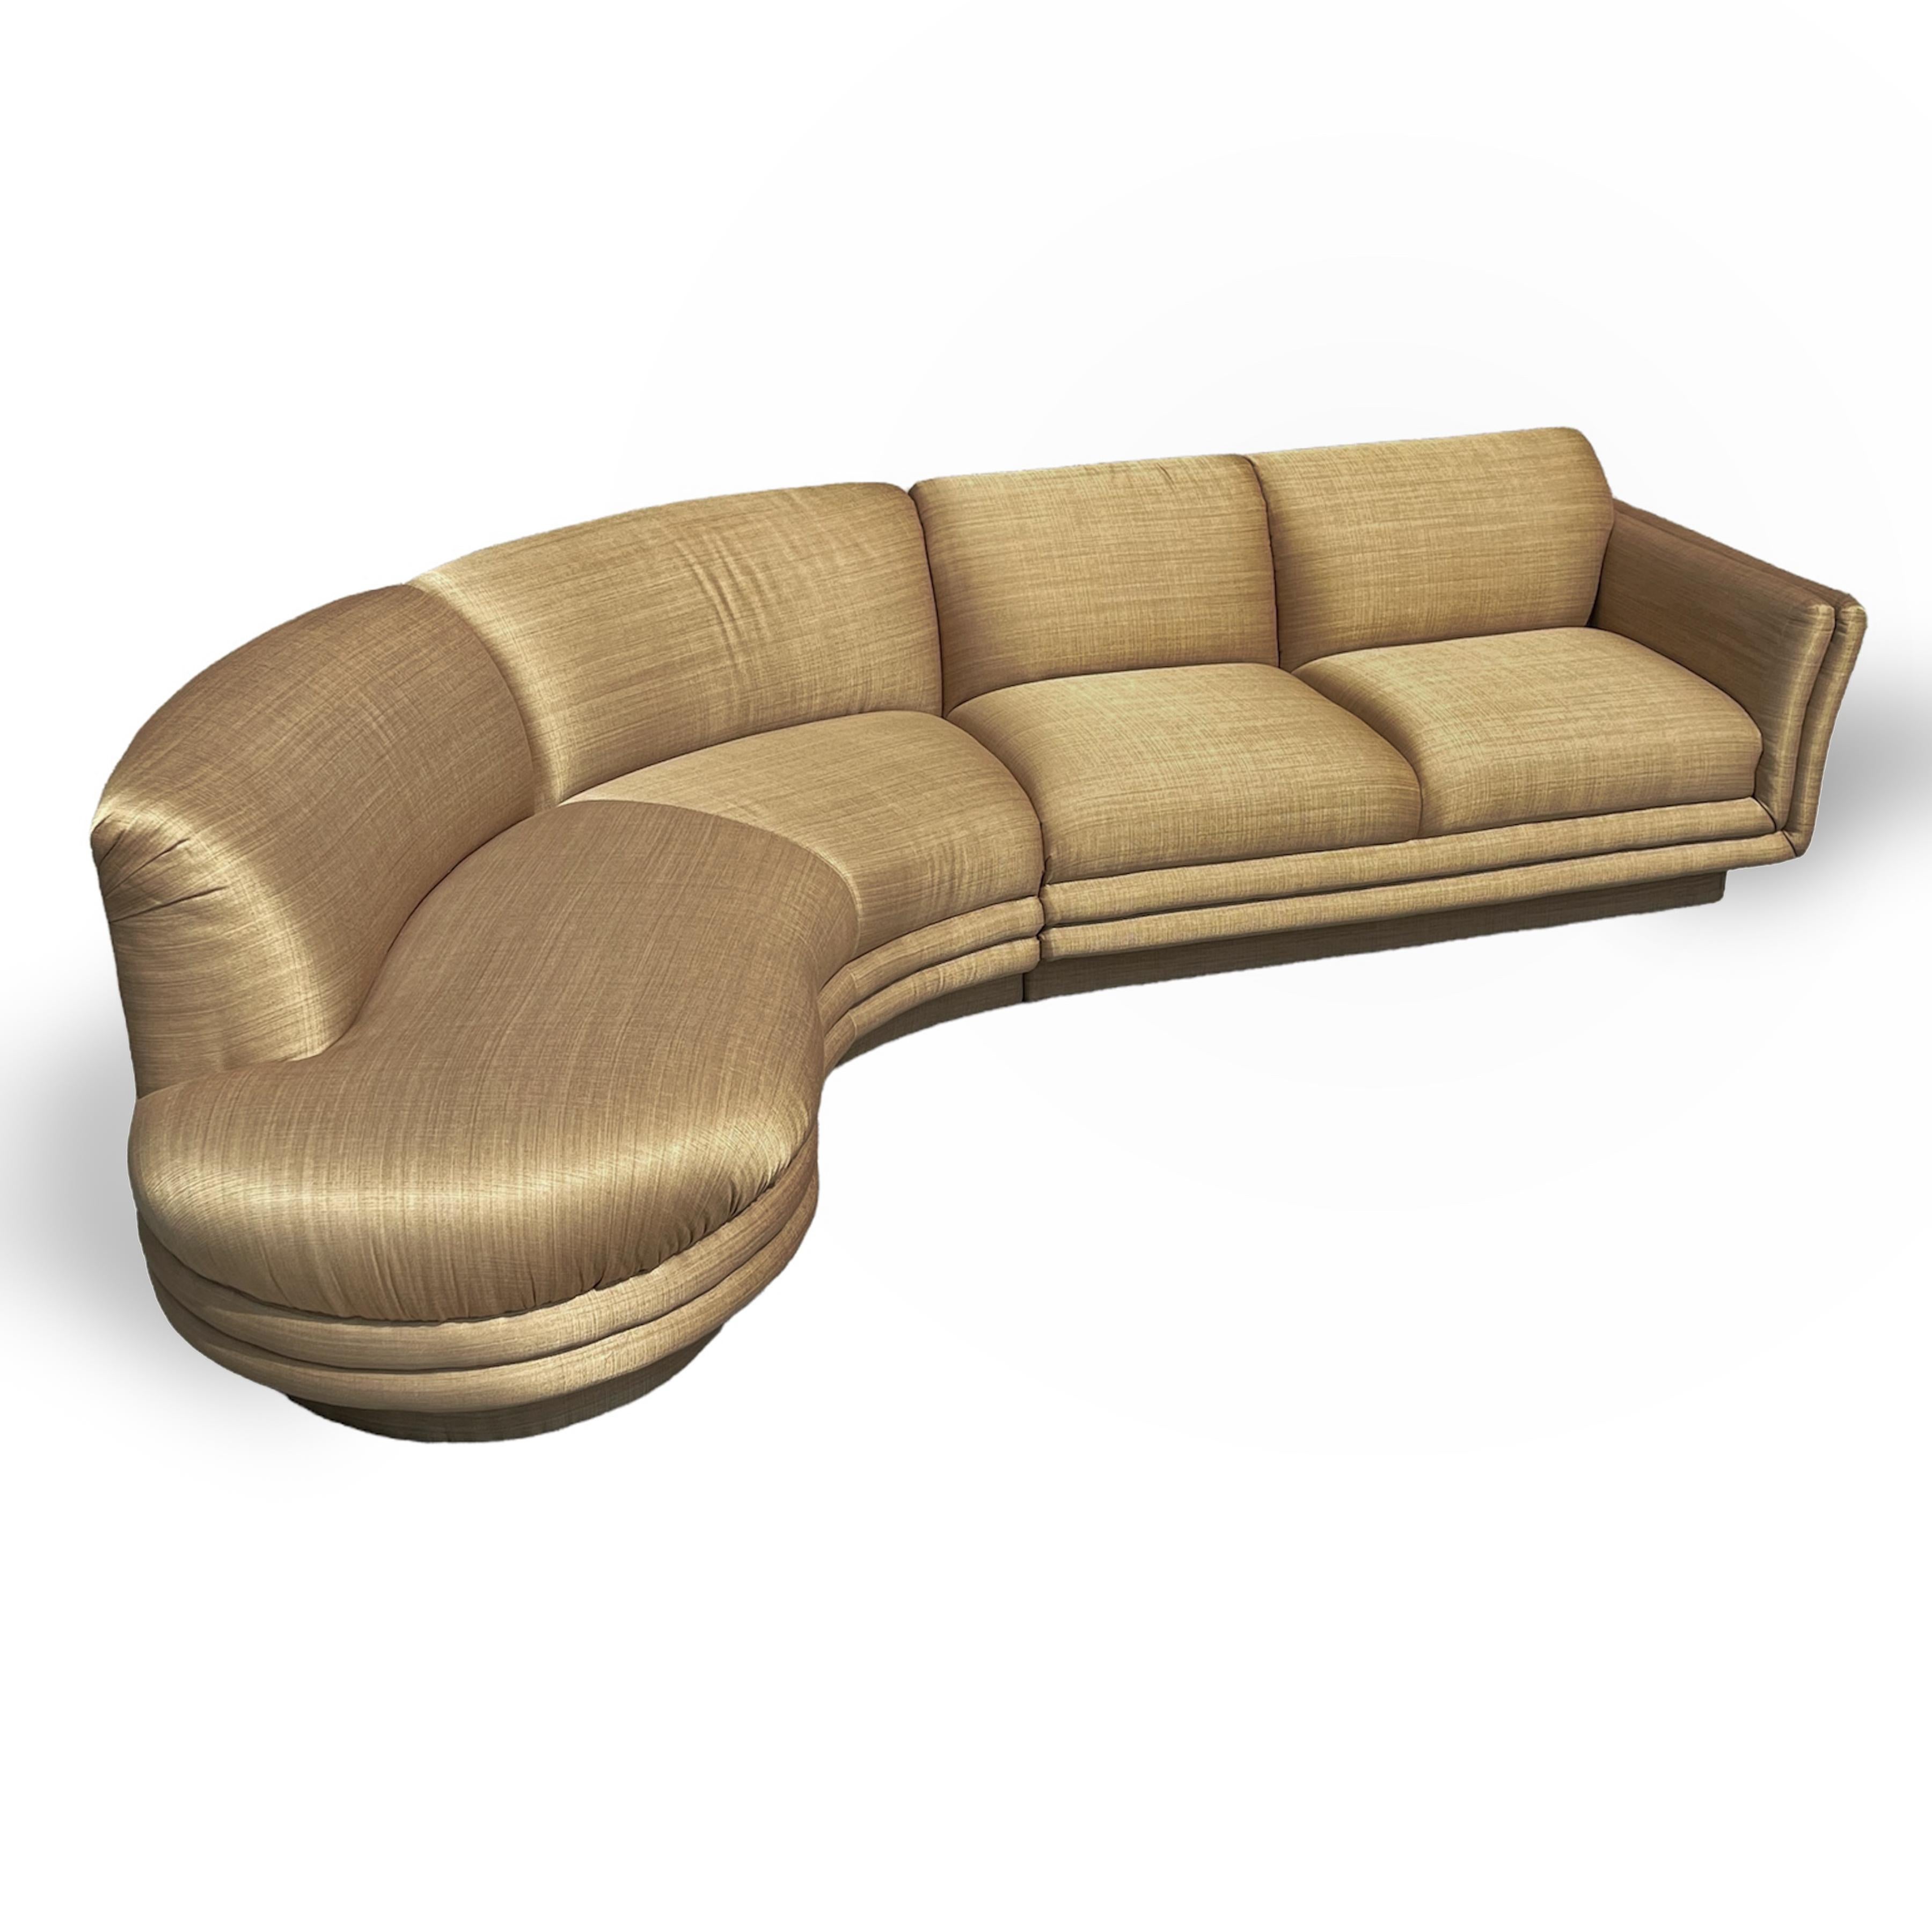 This elegant and comfortable two piece sectional sofa by Preview/ Weiman exhibits great style with its asymmetrical shape and sensuous, curved. open-arm end and floating quality. The sofa is in excellent original condition including the rich, bronze